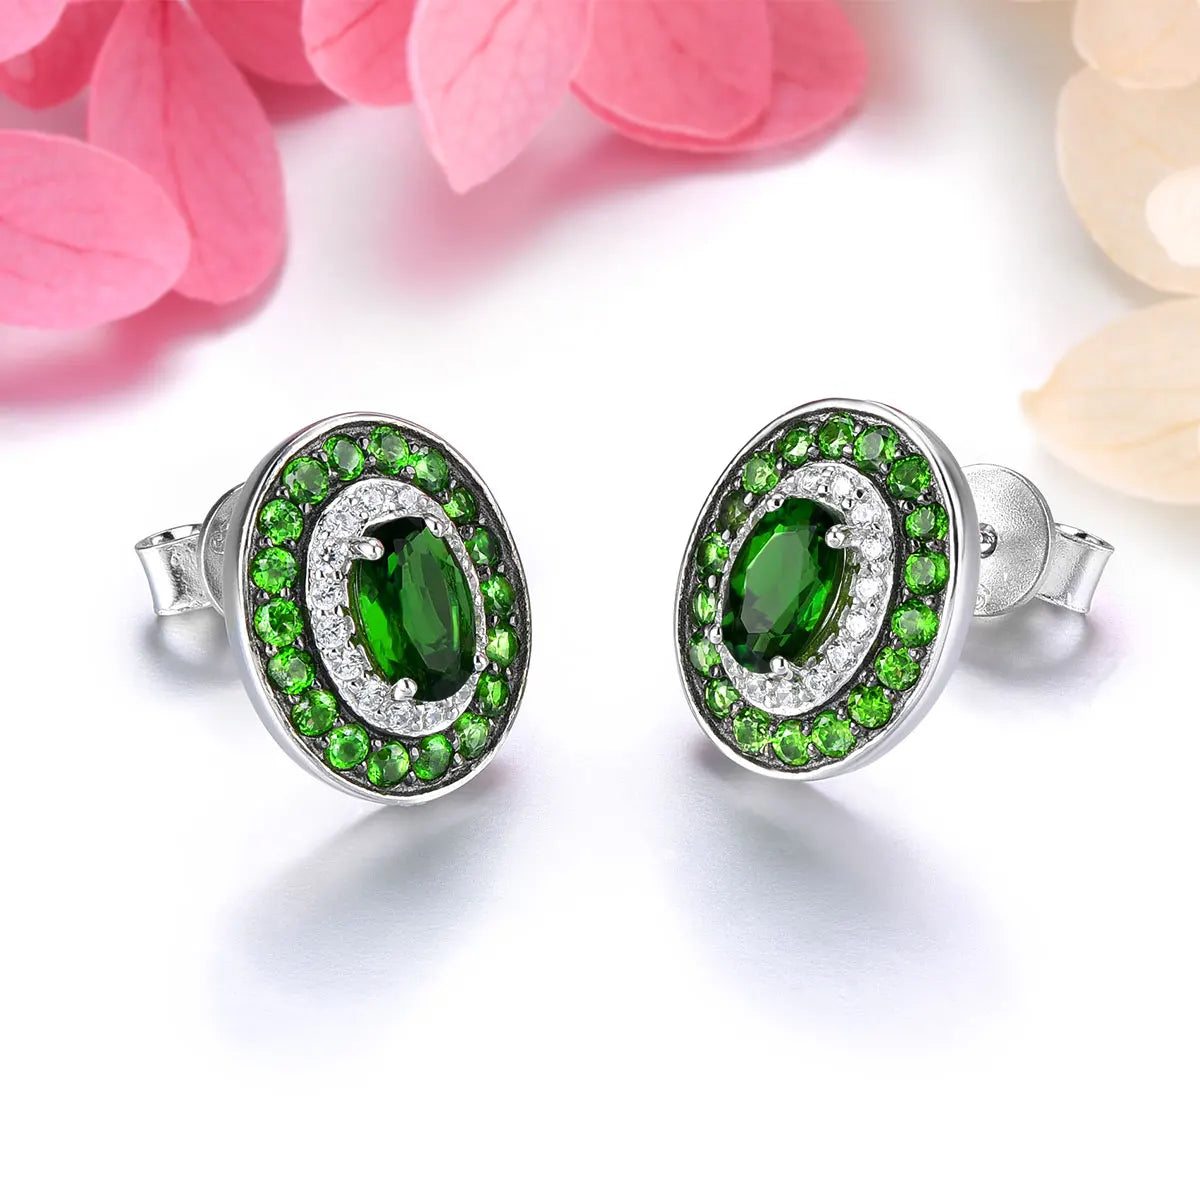 Natural Chrome Diopside Sterling Silver Stud Earring 2.2 Carats Gemstone Original Design Women Classic Elegant Jewelry Style